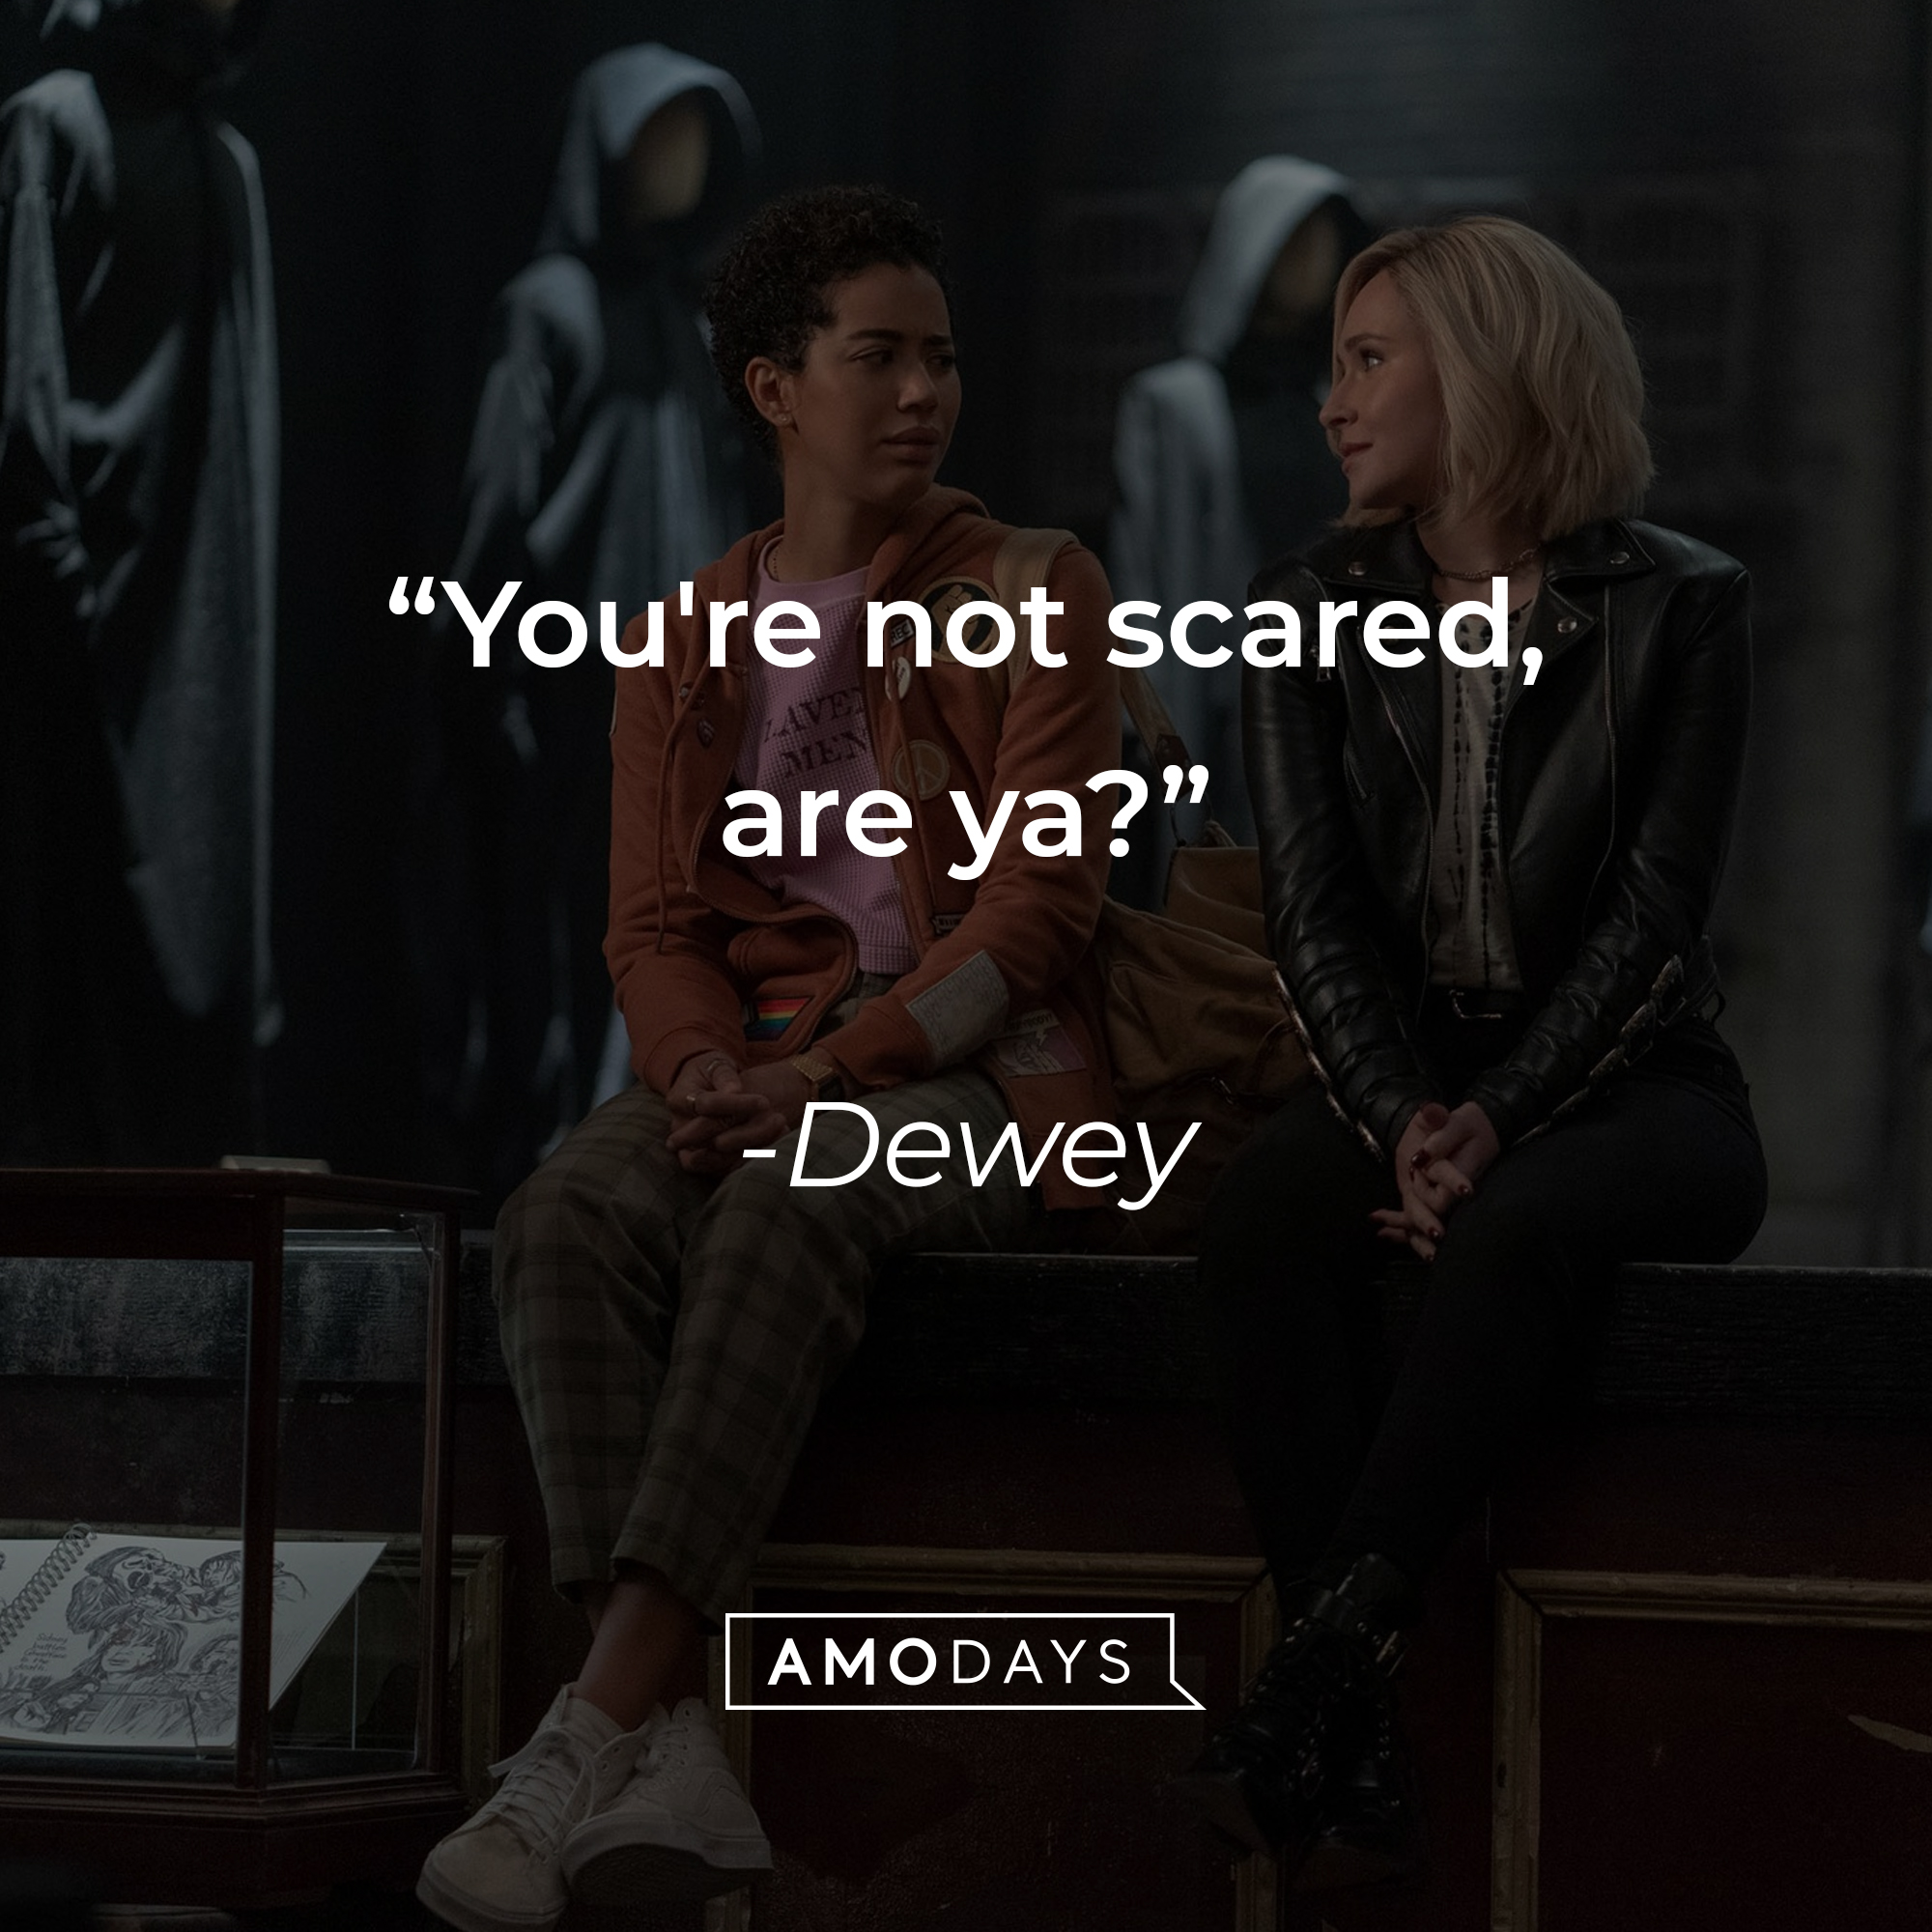 A photo from "Scream 4" with the quote, "You're not scared, are ya?" | Source: Facebook/ScreamMovies